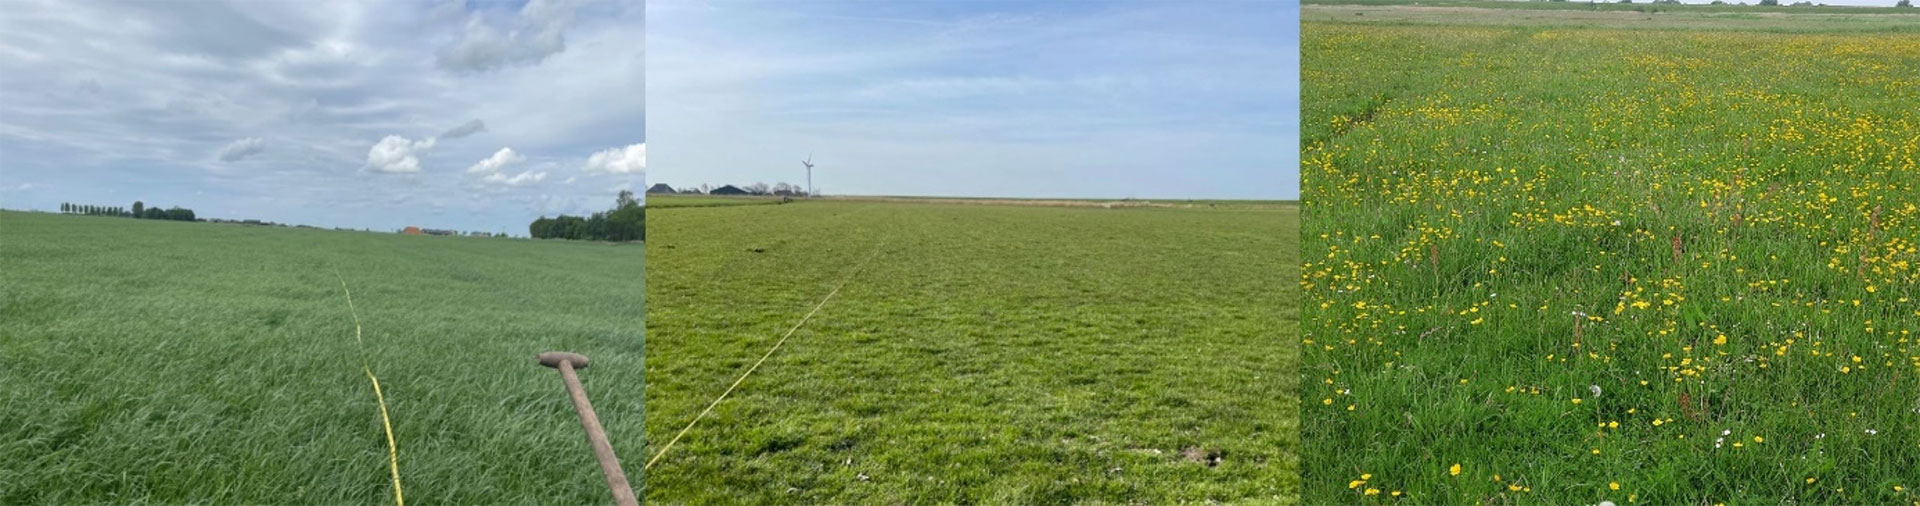 Field frequently used for arable cropping (left), intermittent crop rotation (center), and a long-term grassland (right)